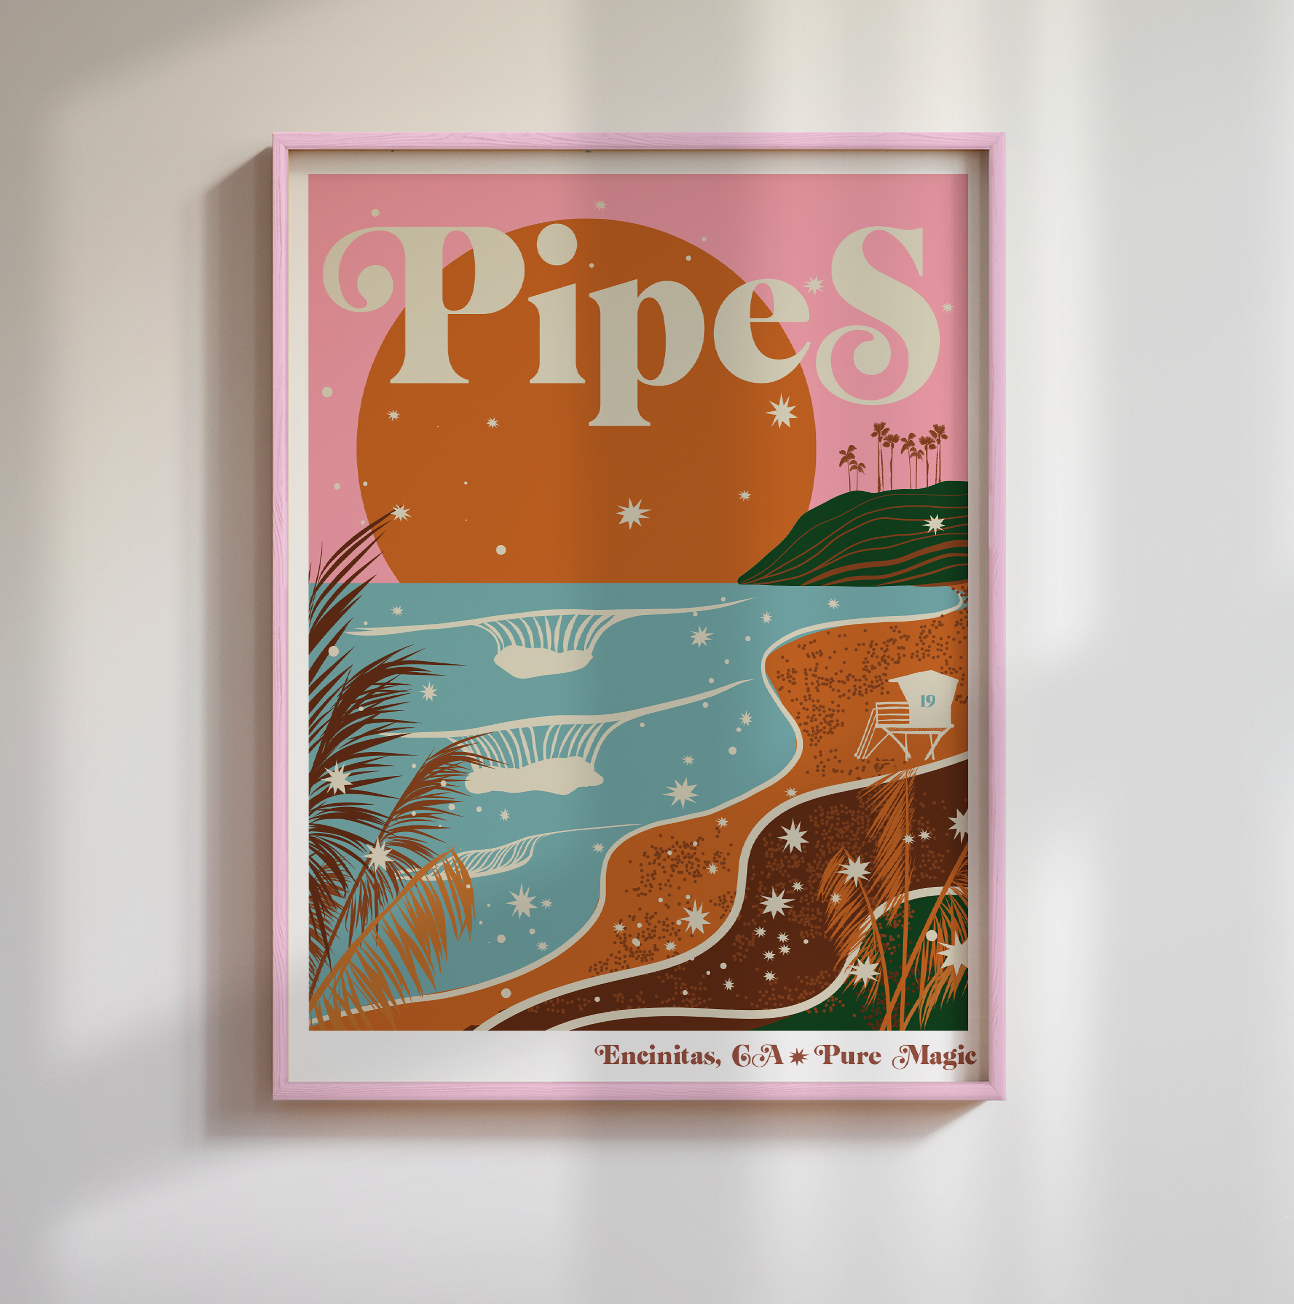 Pure Magic Collection: Pipes